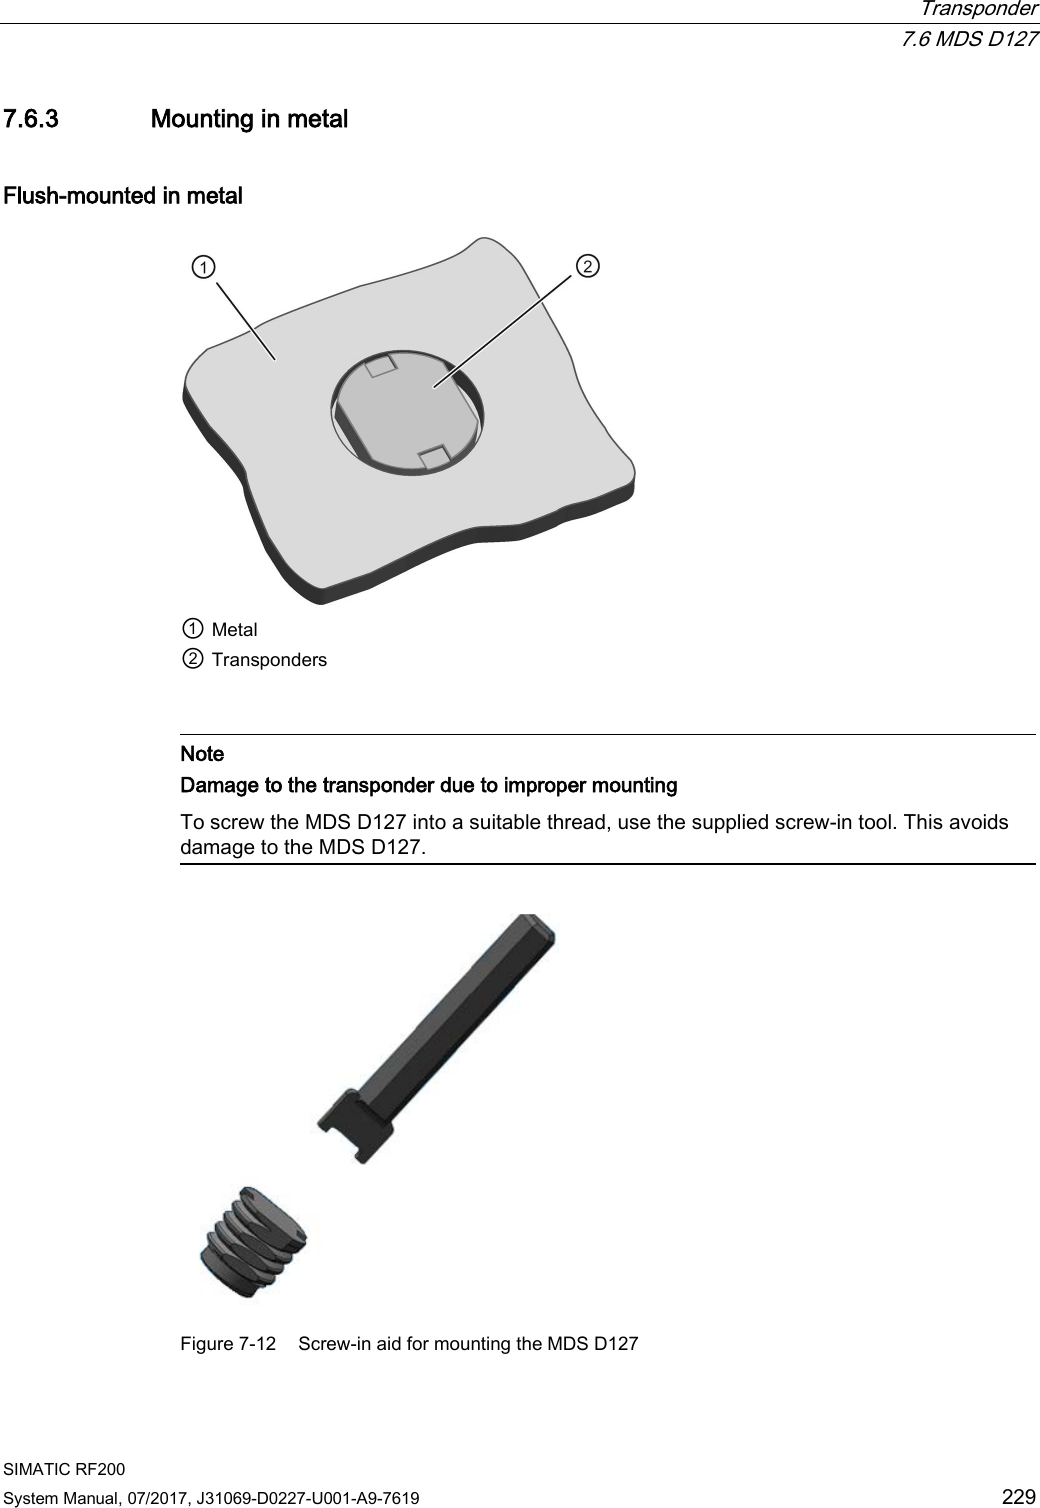  Transponder  7.6 MDS D127 SIMATIC RF200 System Manual, 07/2017, J31069-D0227-U001-A9-7619 229 7.6.3 Mounting in metal Flush-mounted in metal  ① Metal ② Transponders    Note Damage to the transponder due to improper mounting To screw the MDS D127 into a suitable thread, use the supplied screw-in tool. This avoids damage to the MDS D127.   Figure 7-12  Screw-in aid for mounting the MDS D127 